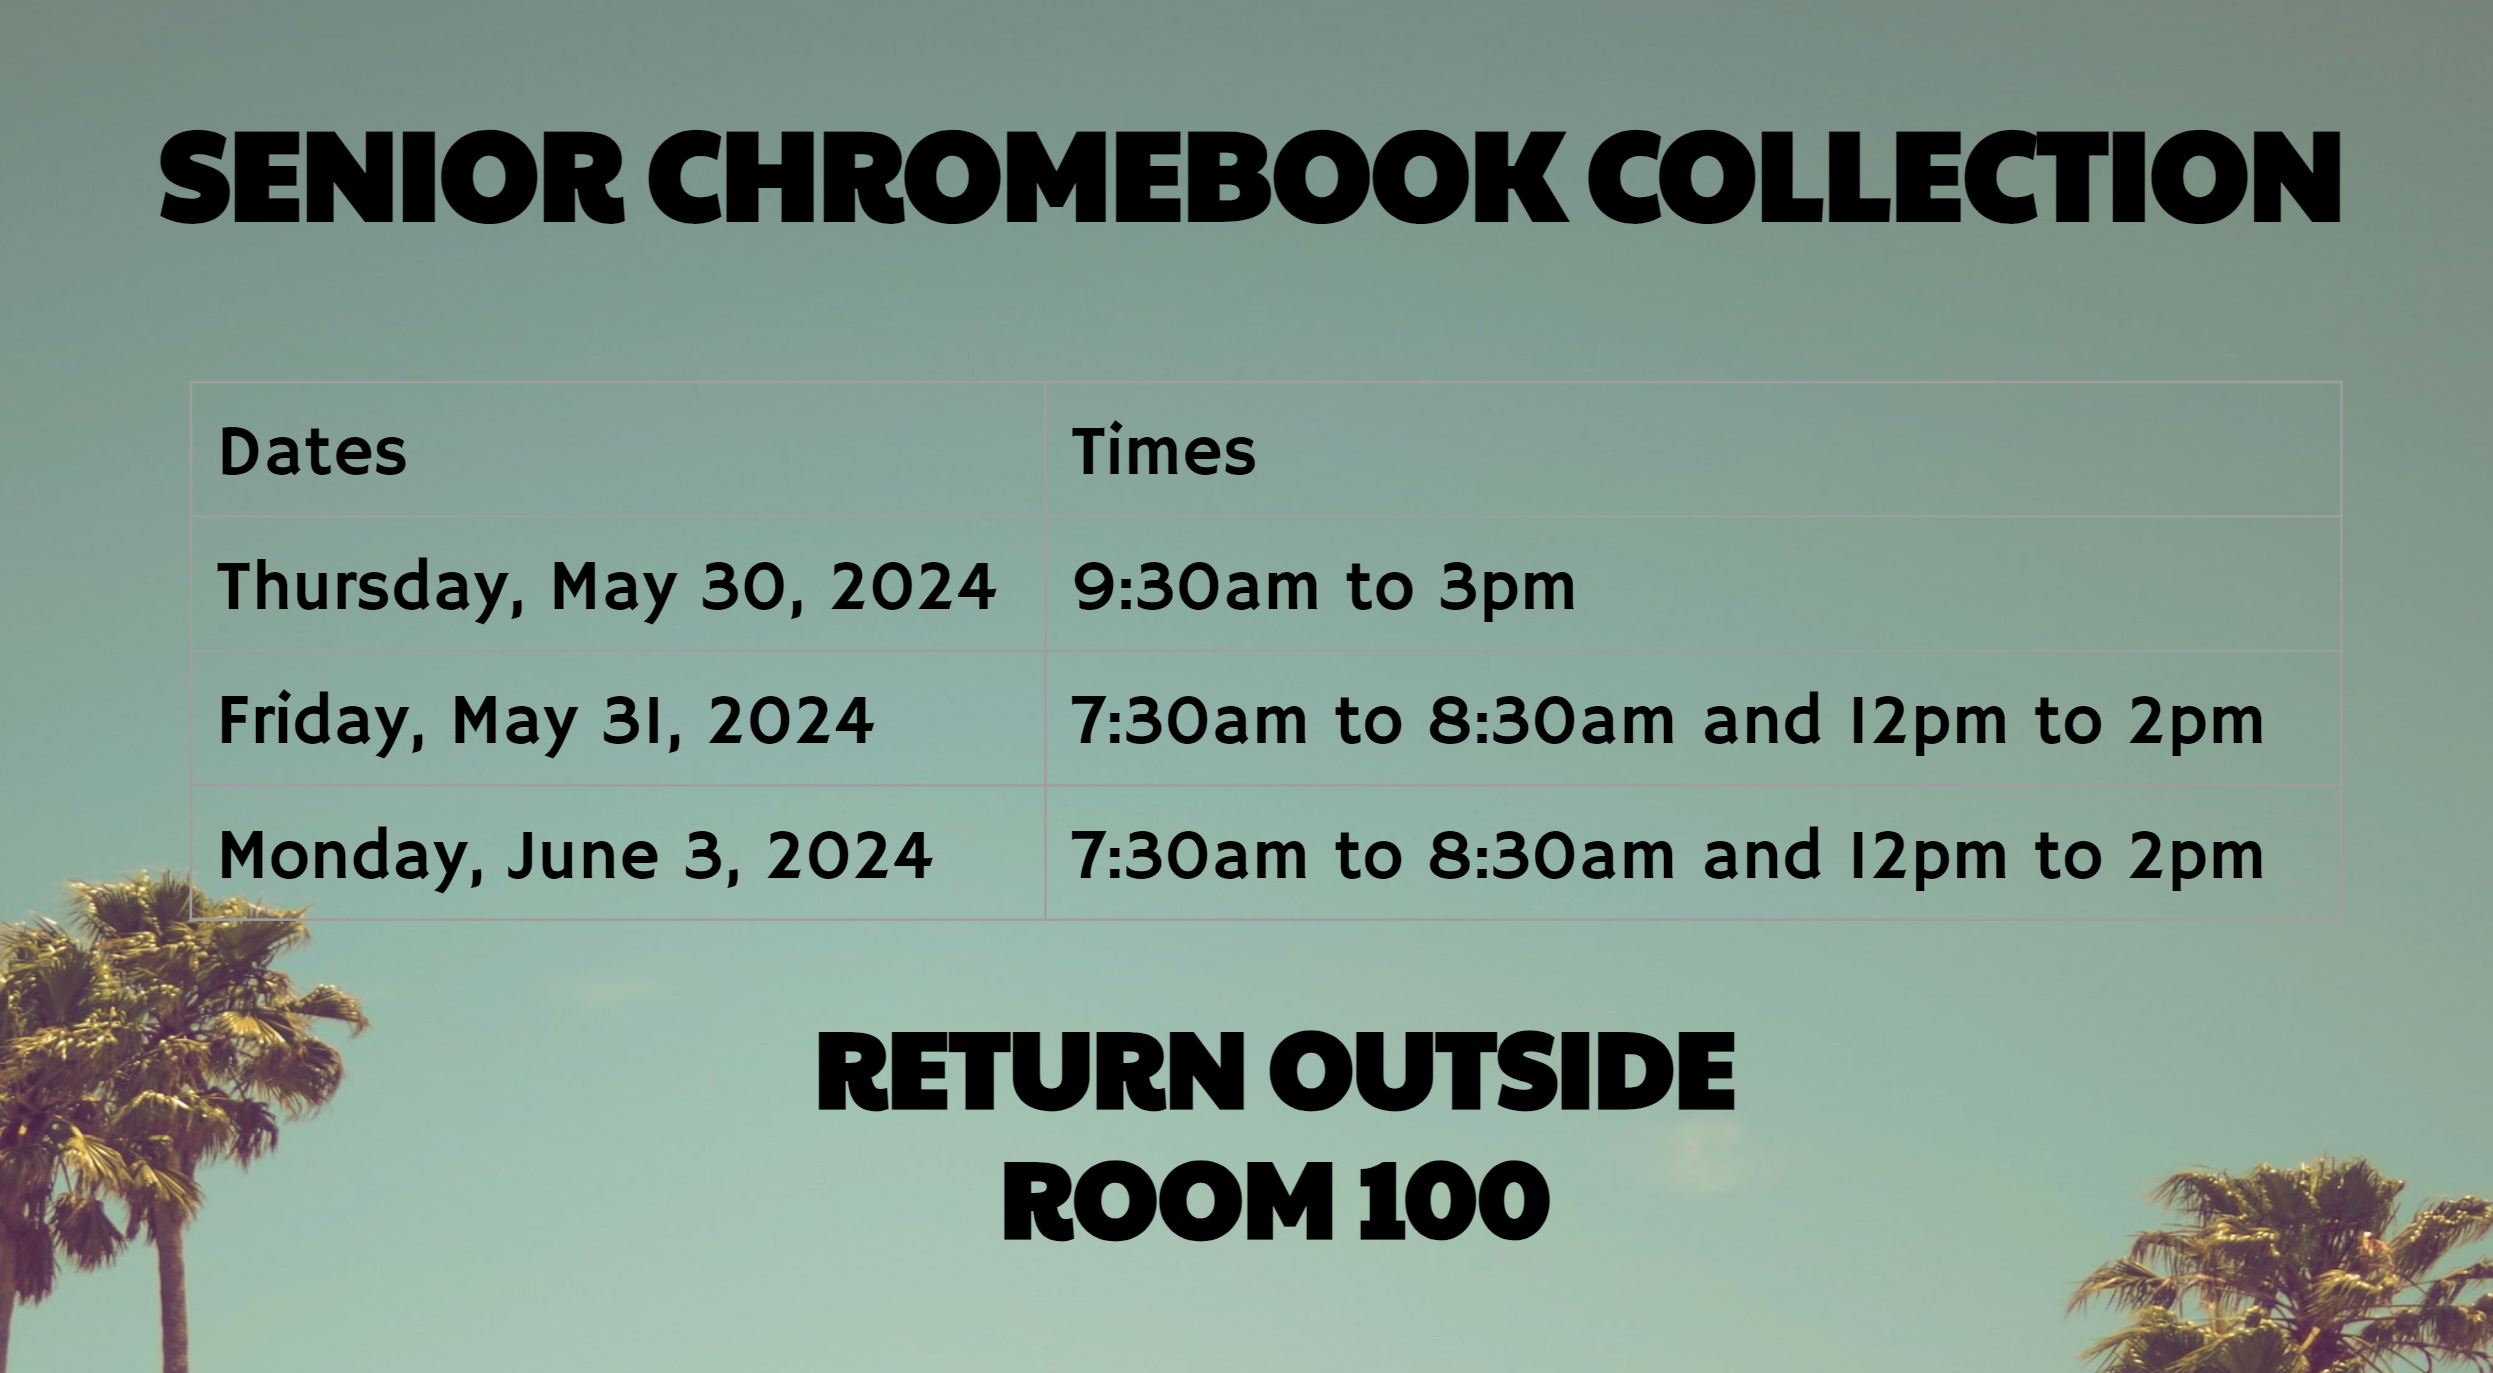 Information for Chromebook collection